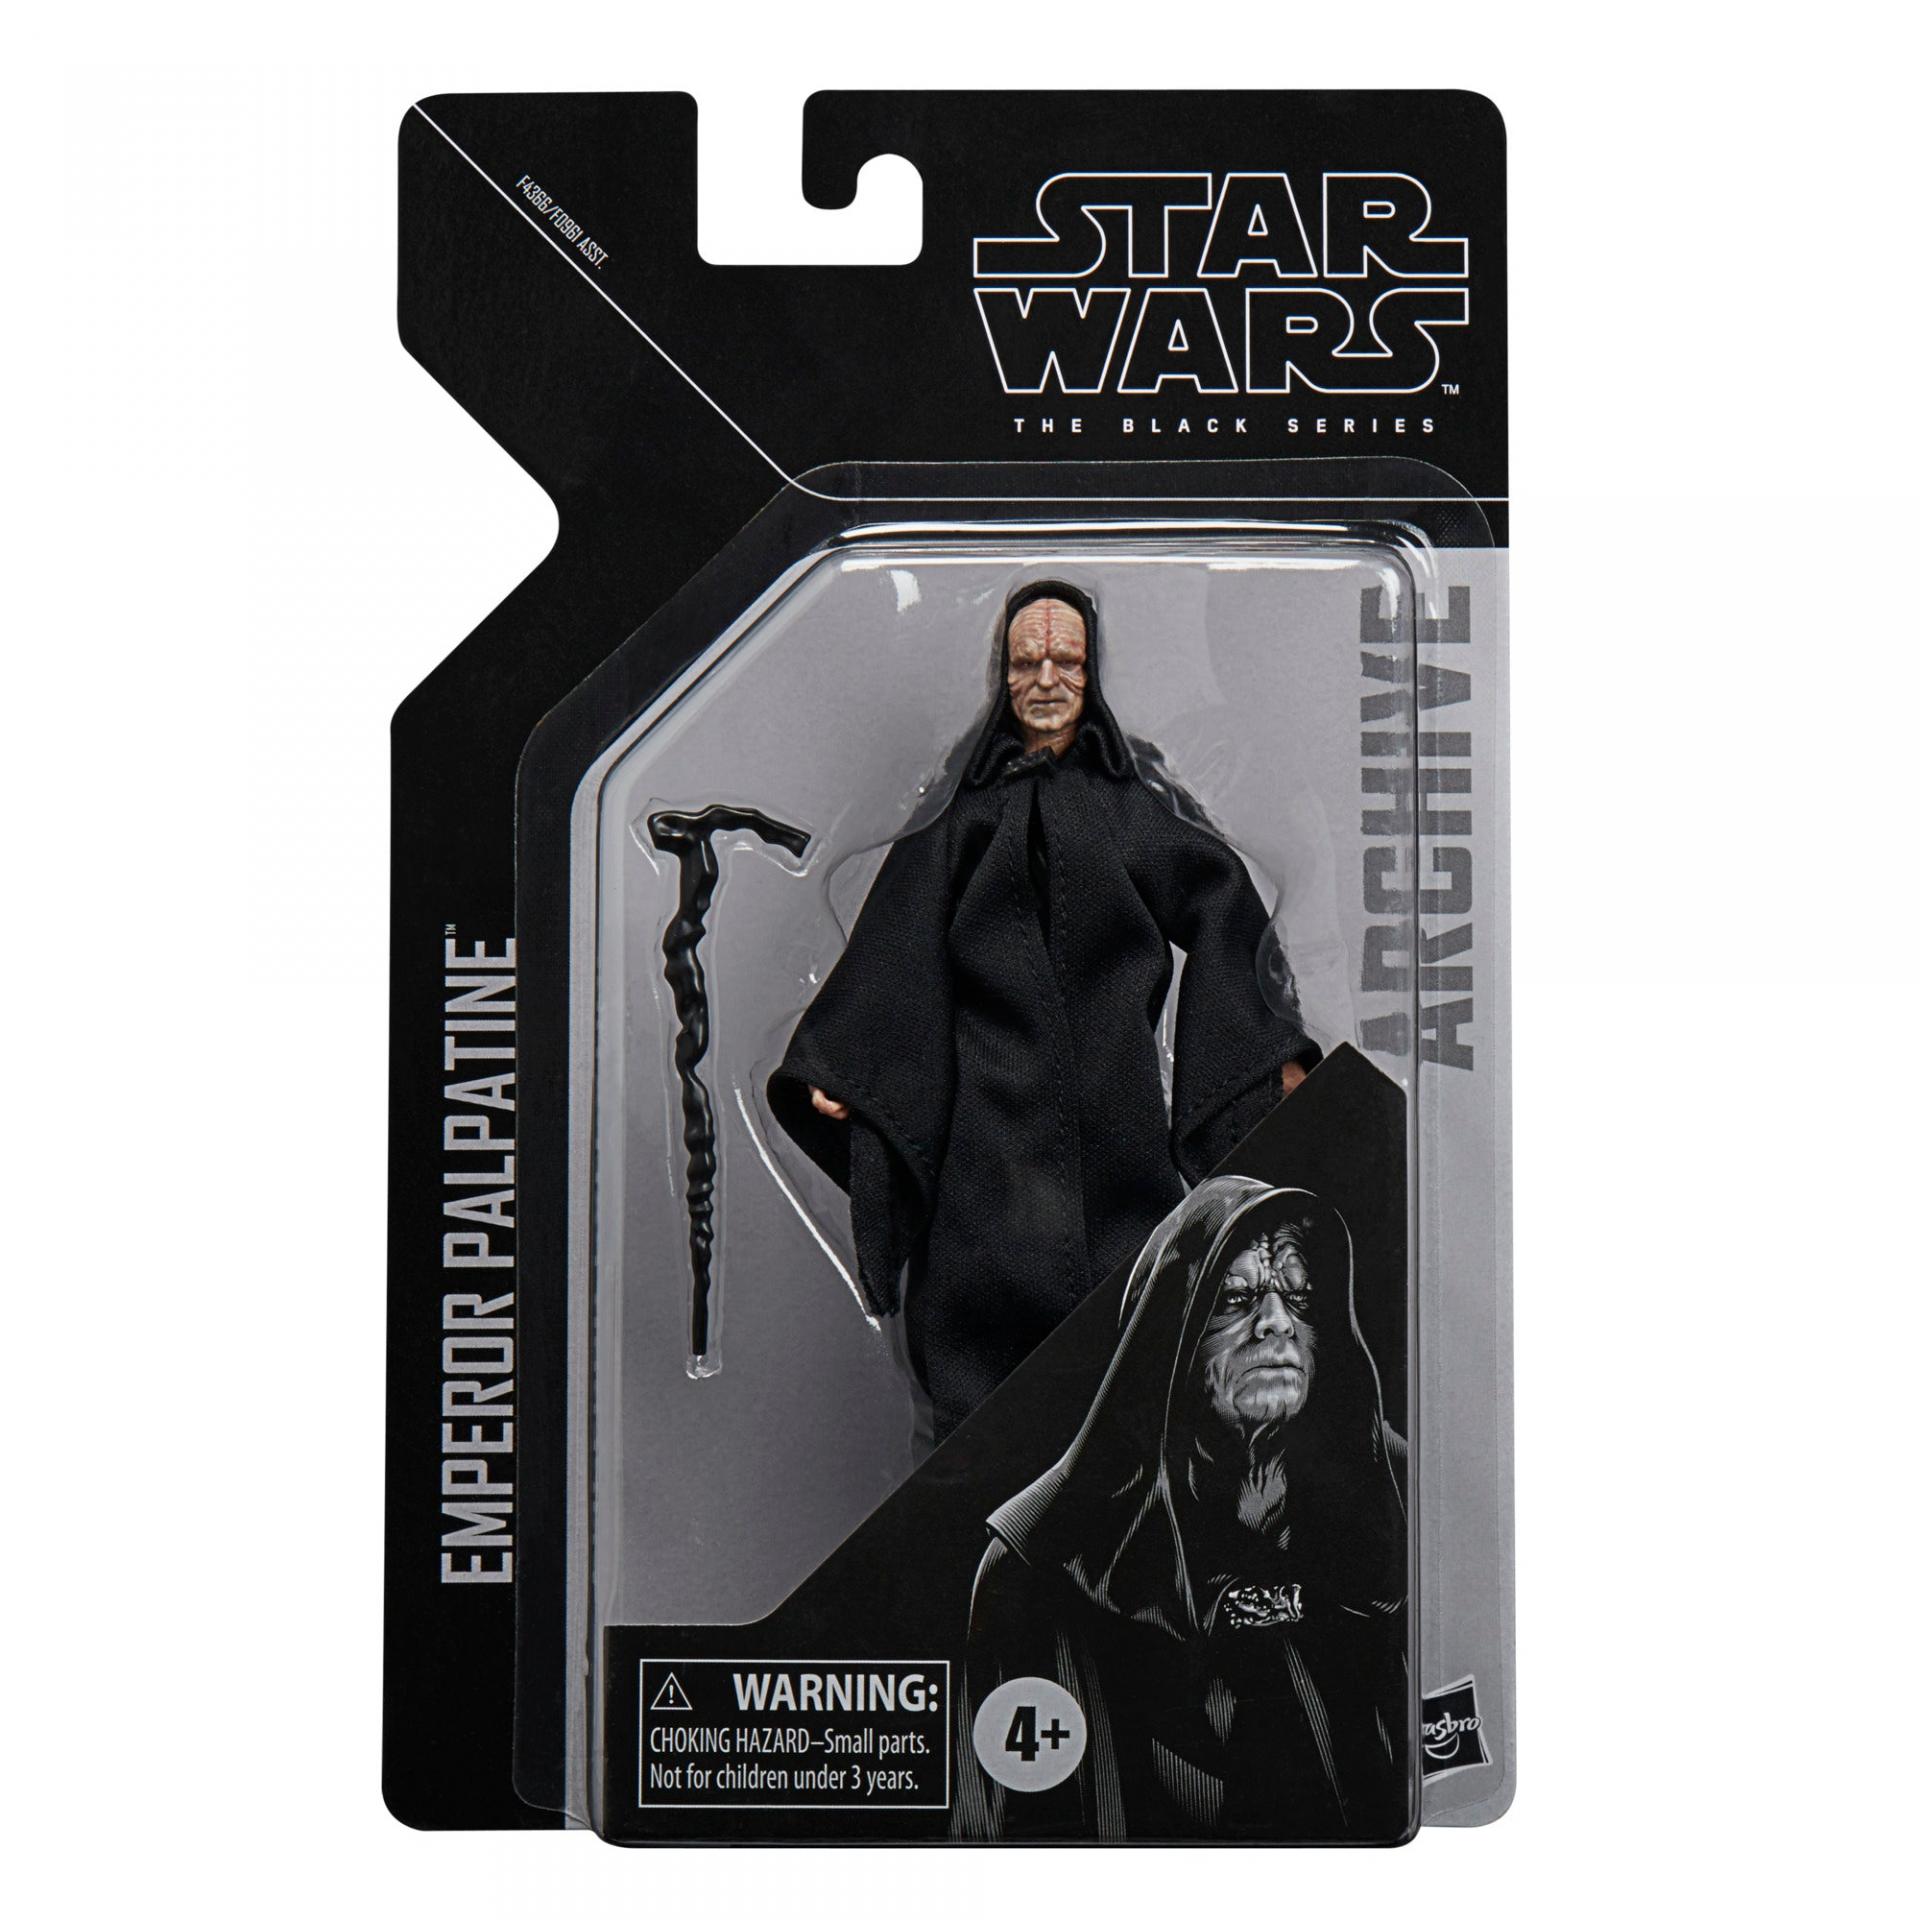 Star wars the black series archive emperor palpatine 15cm jawascave 8